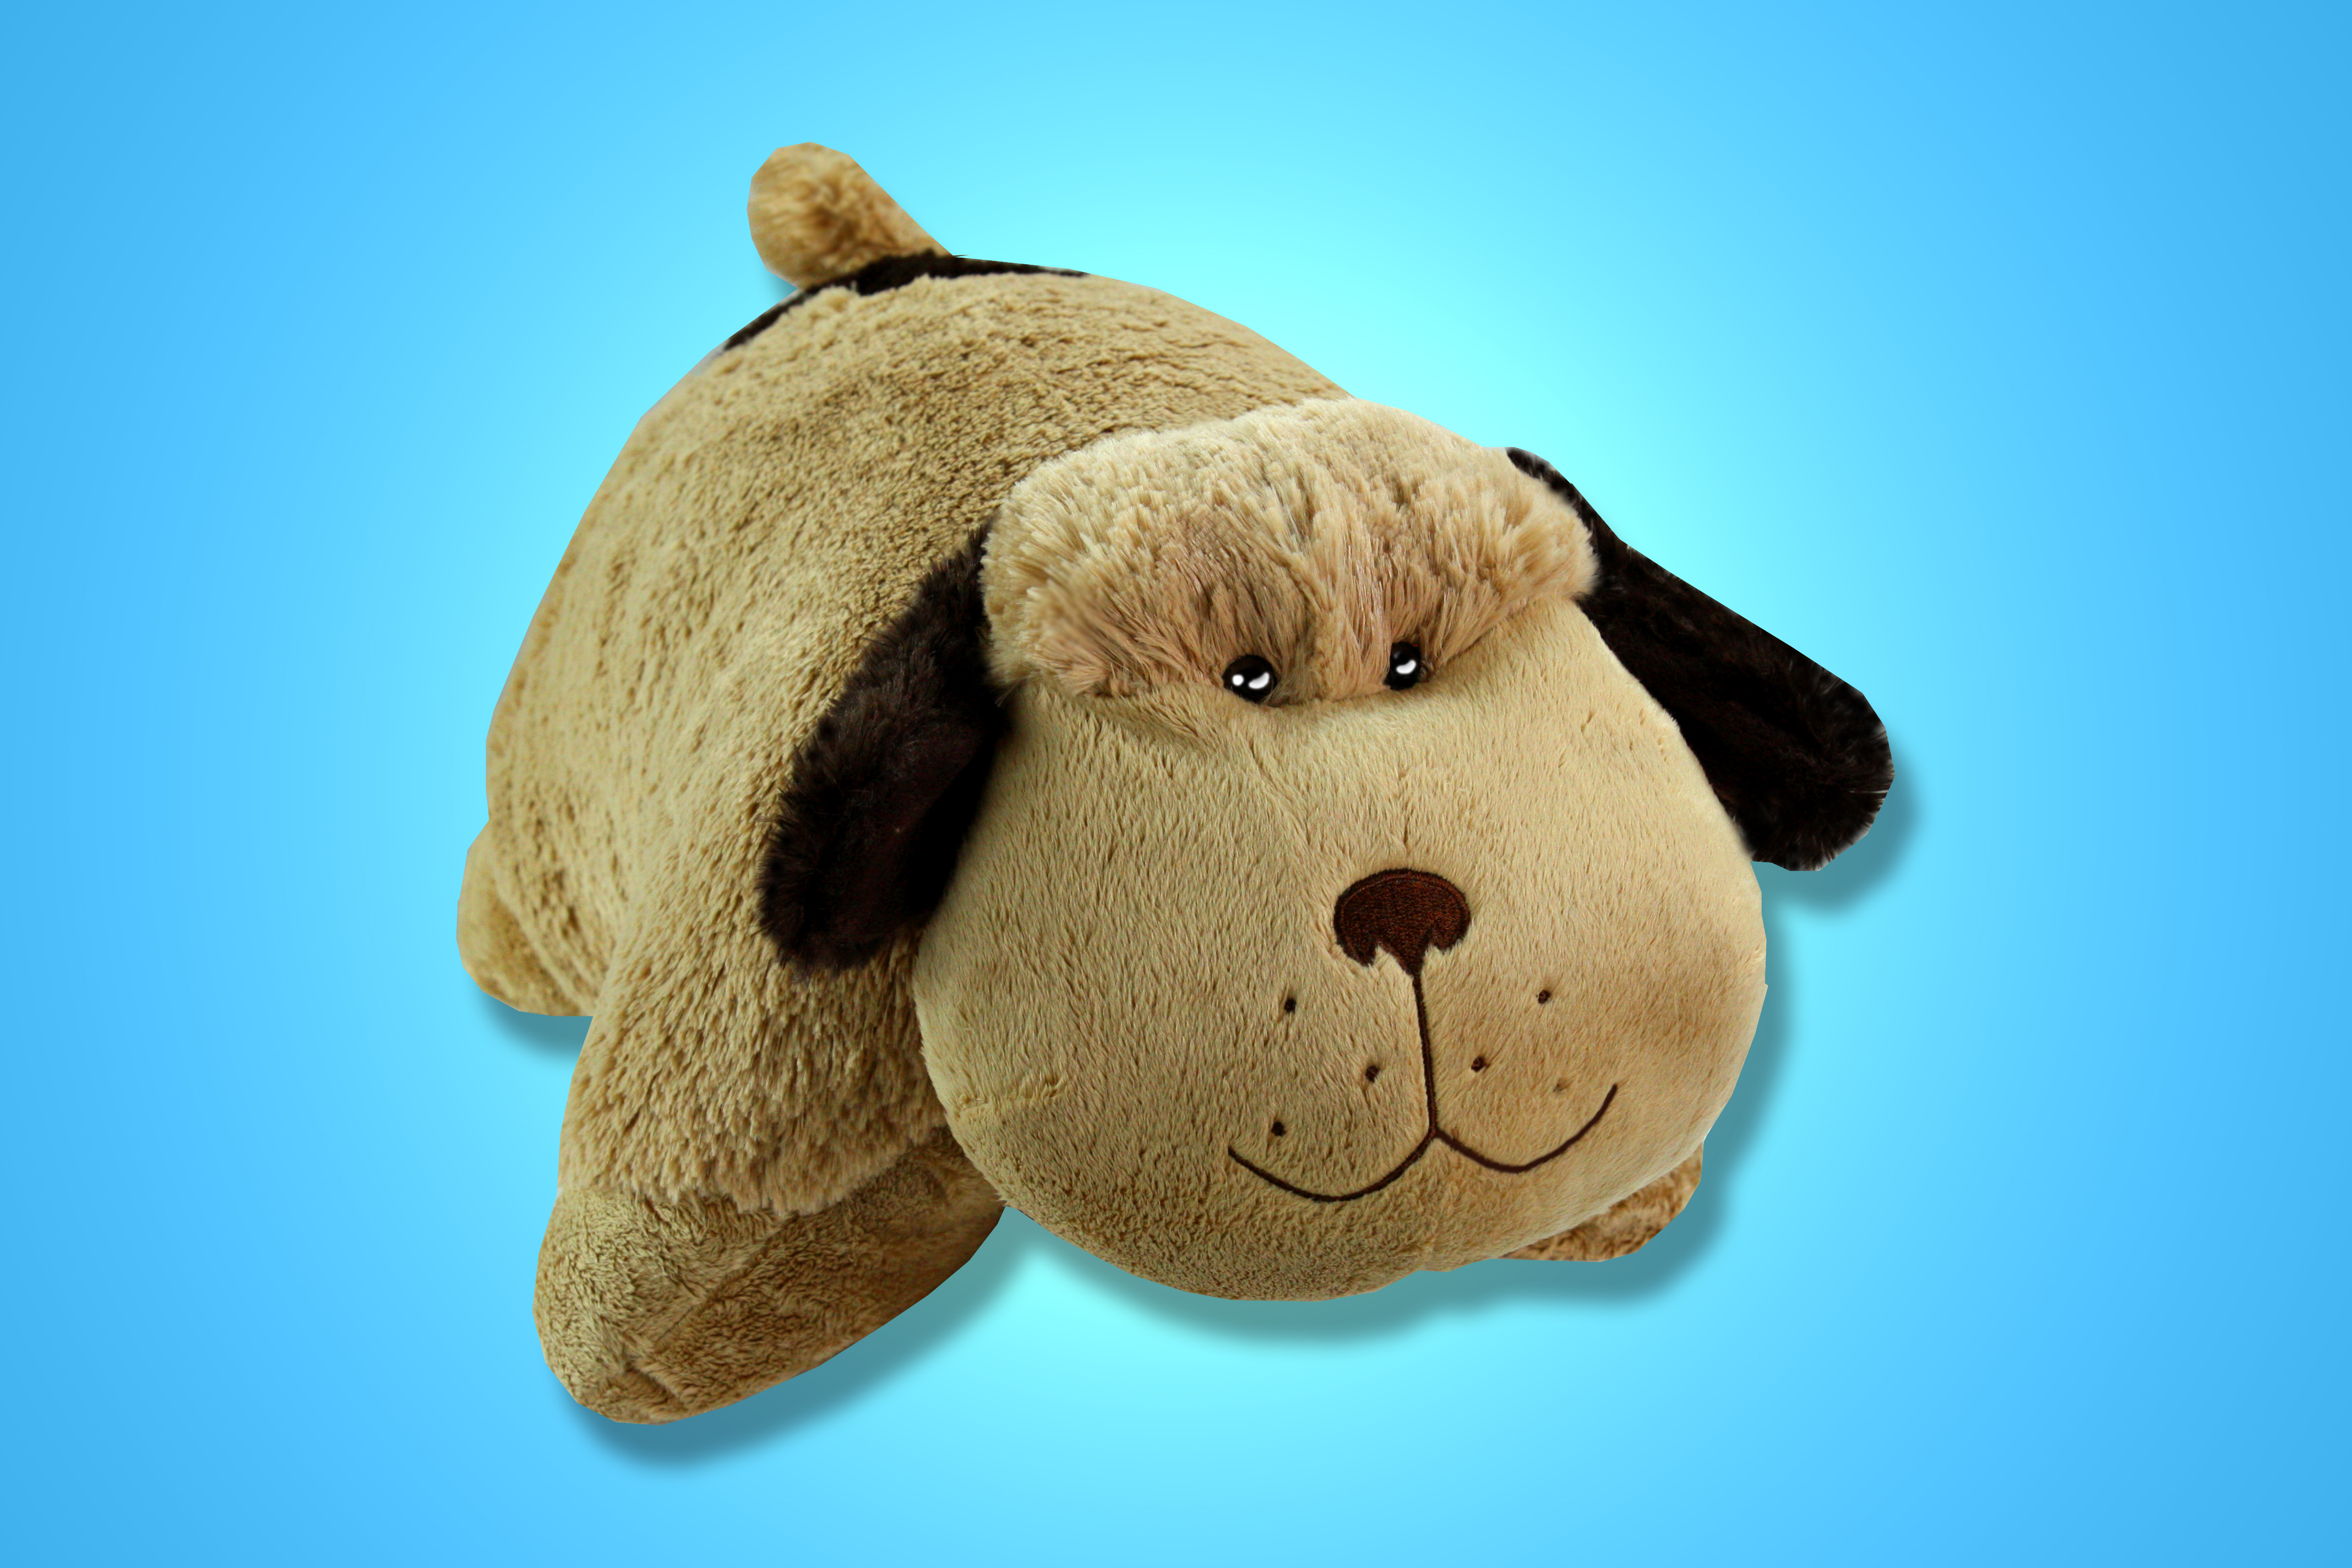 snuggle puppy toys r us